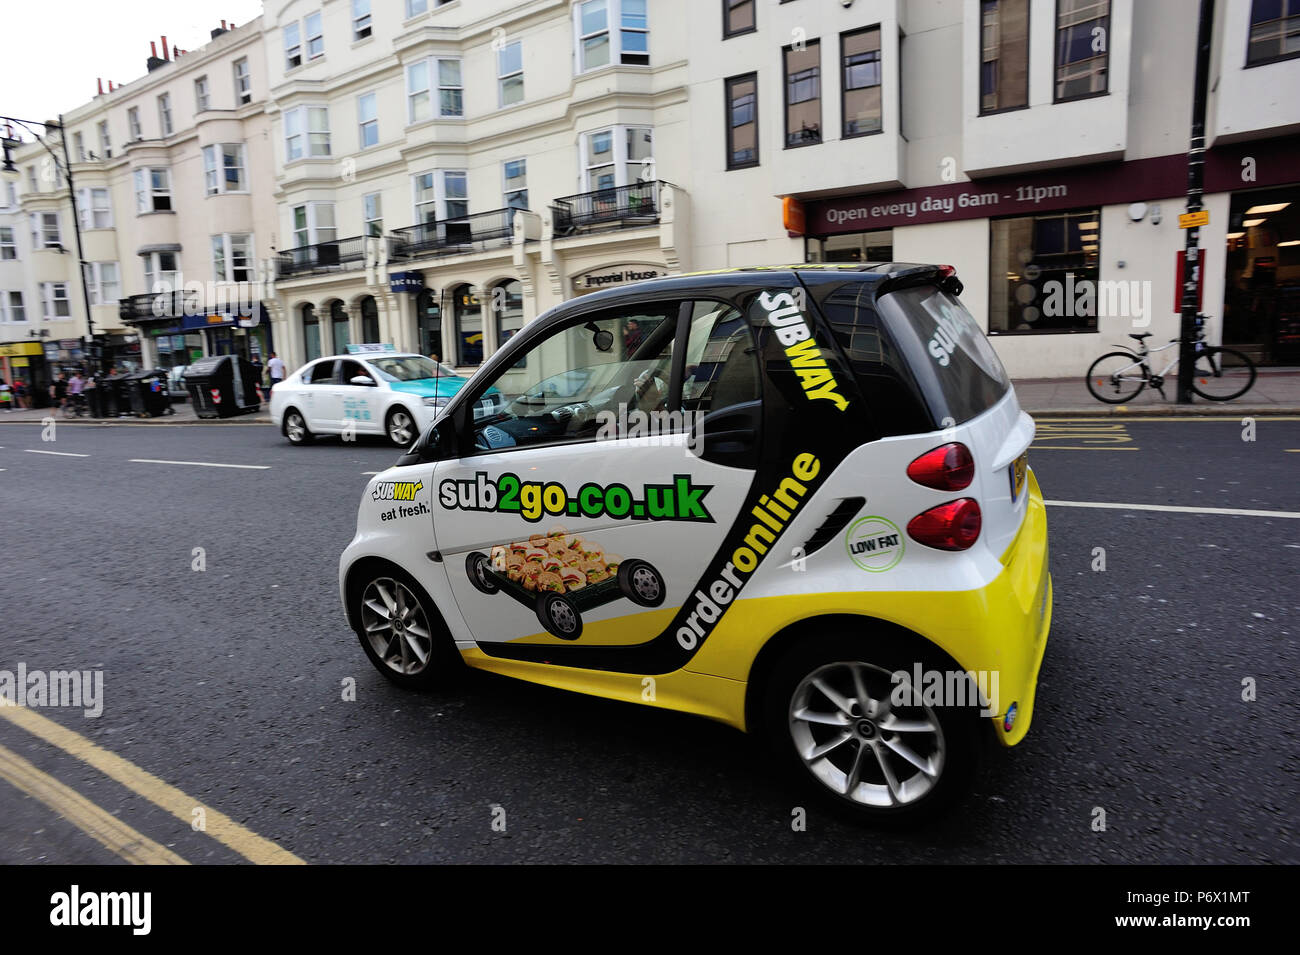 Subway smartcar making a delivery in Brighton, English Seaside Town, Brighton & Hove, East Sussex, England, UK Stock Photo